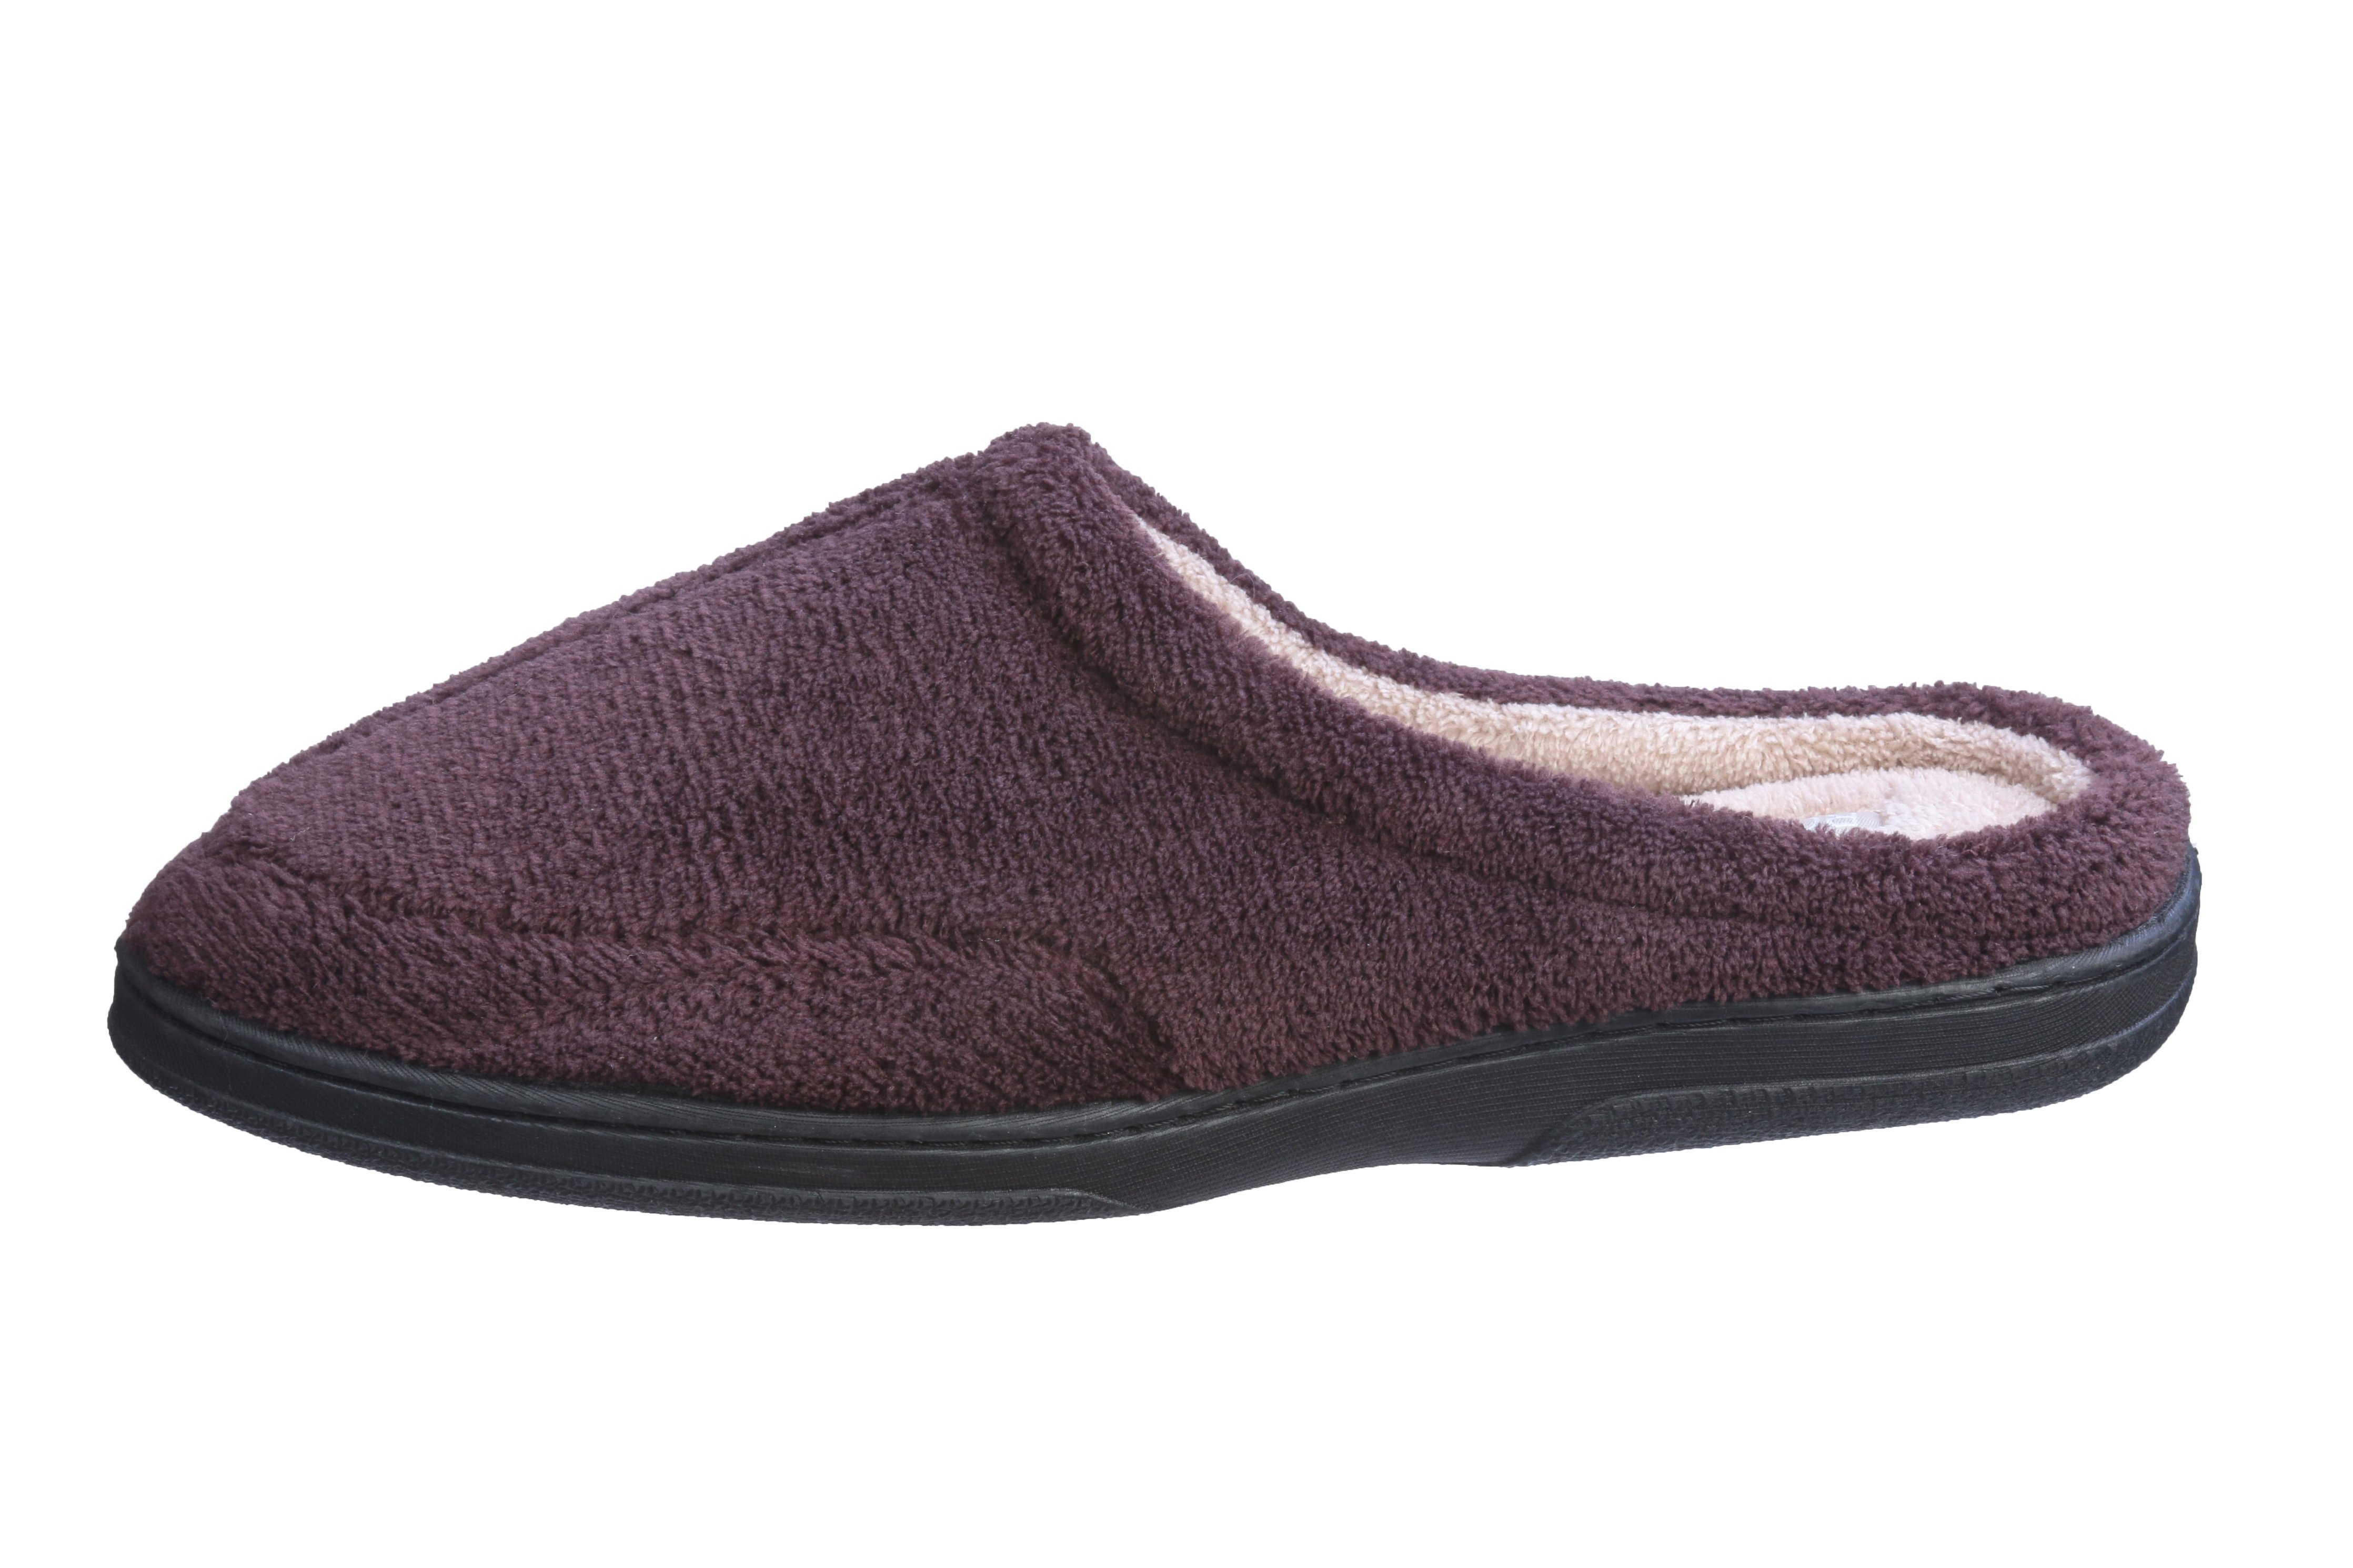 Roxoni Men's Two Tone Durable and Cozy Slide Clog Slipper -sizes 7 to 13 -style #1268 - image 2 of 4